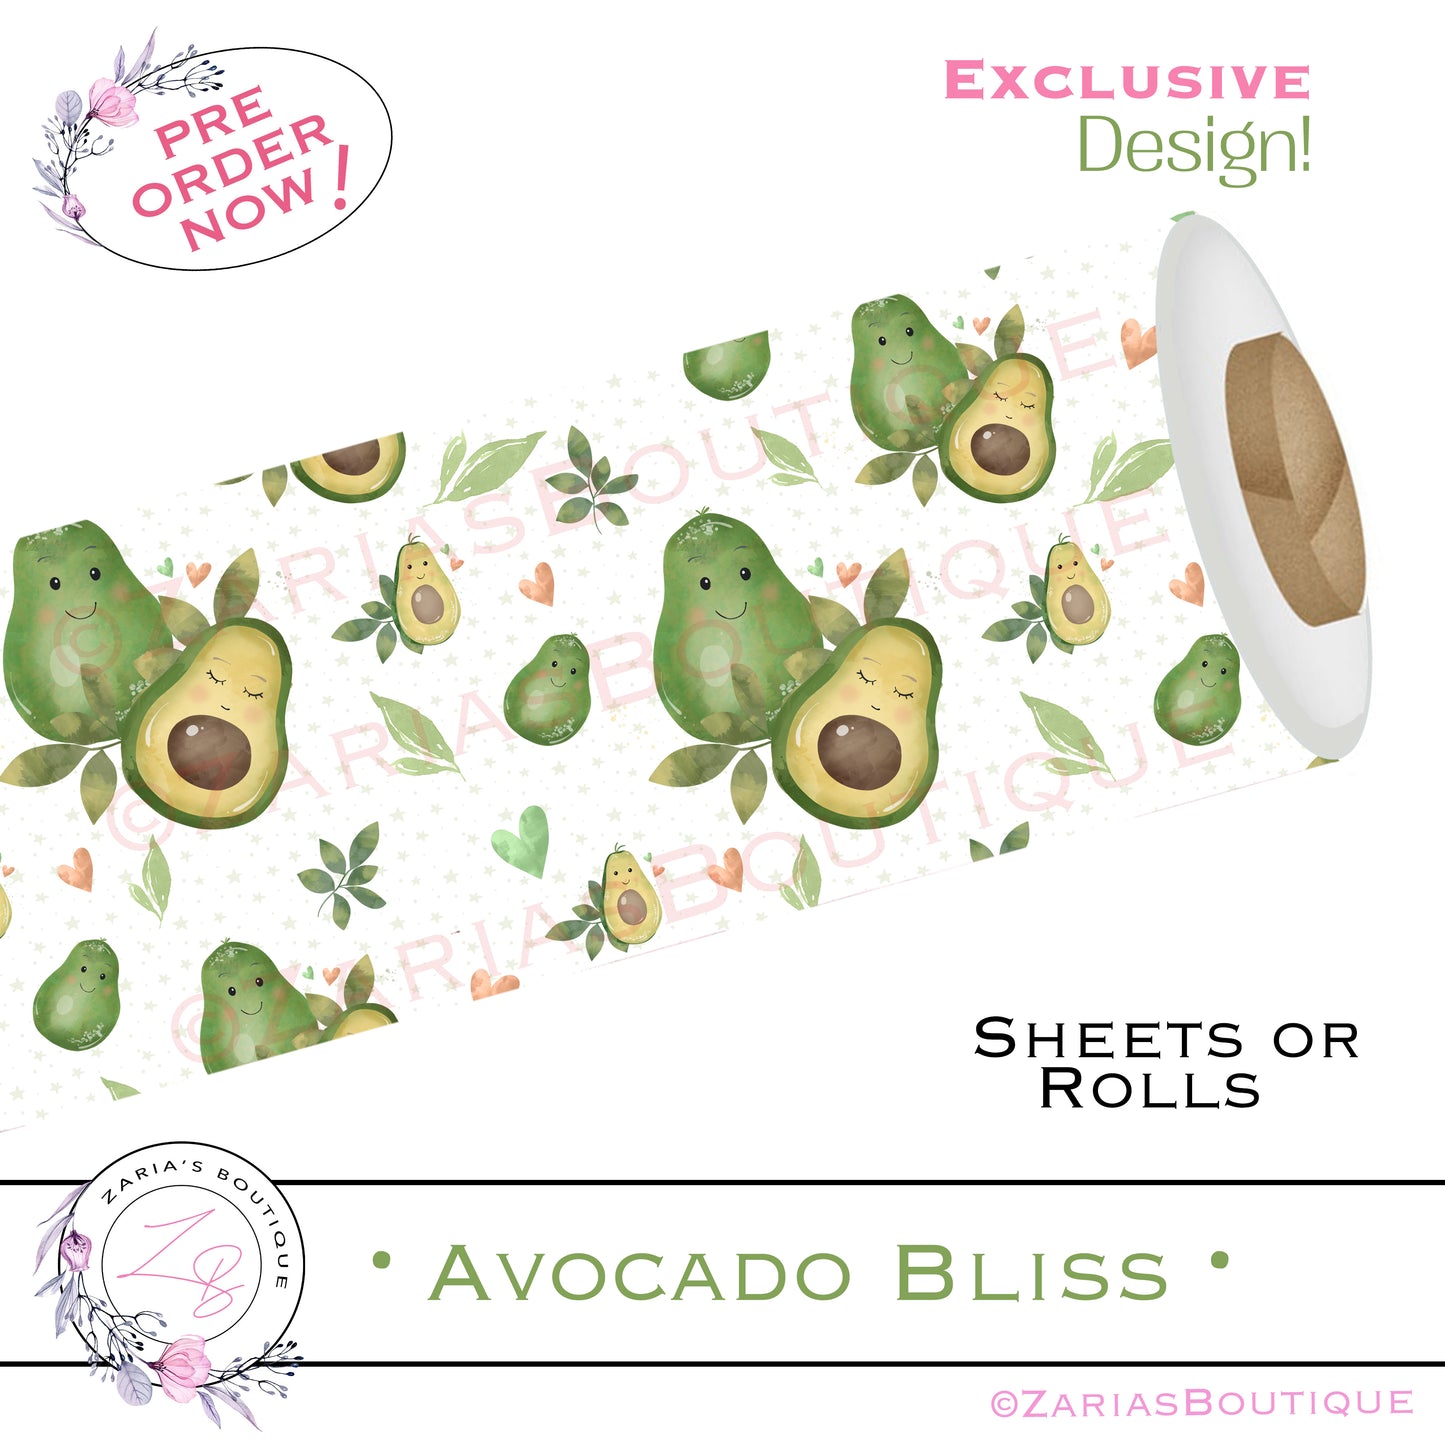 ⋅ Avocado Bliss ⋅ Exclusive Vegan Faux Leather ⋅ Sheets Or Rolls!